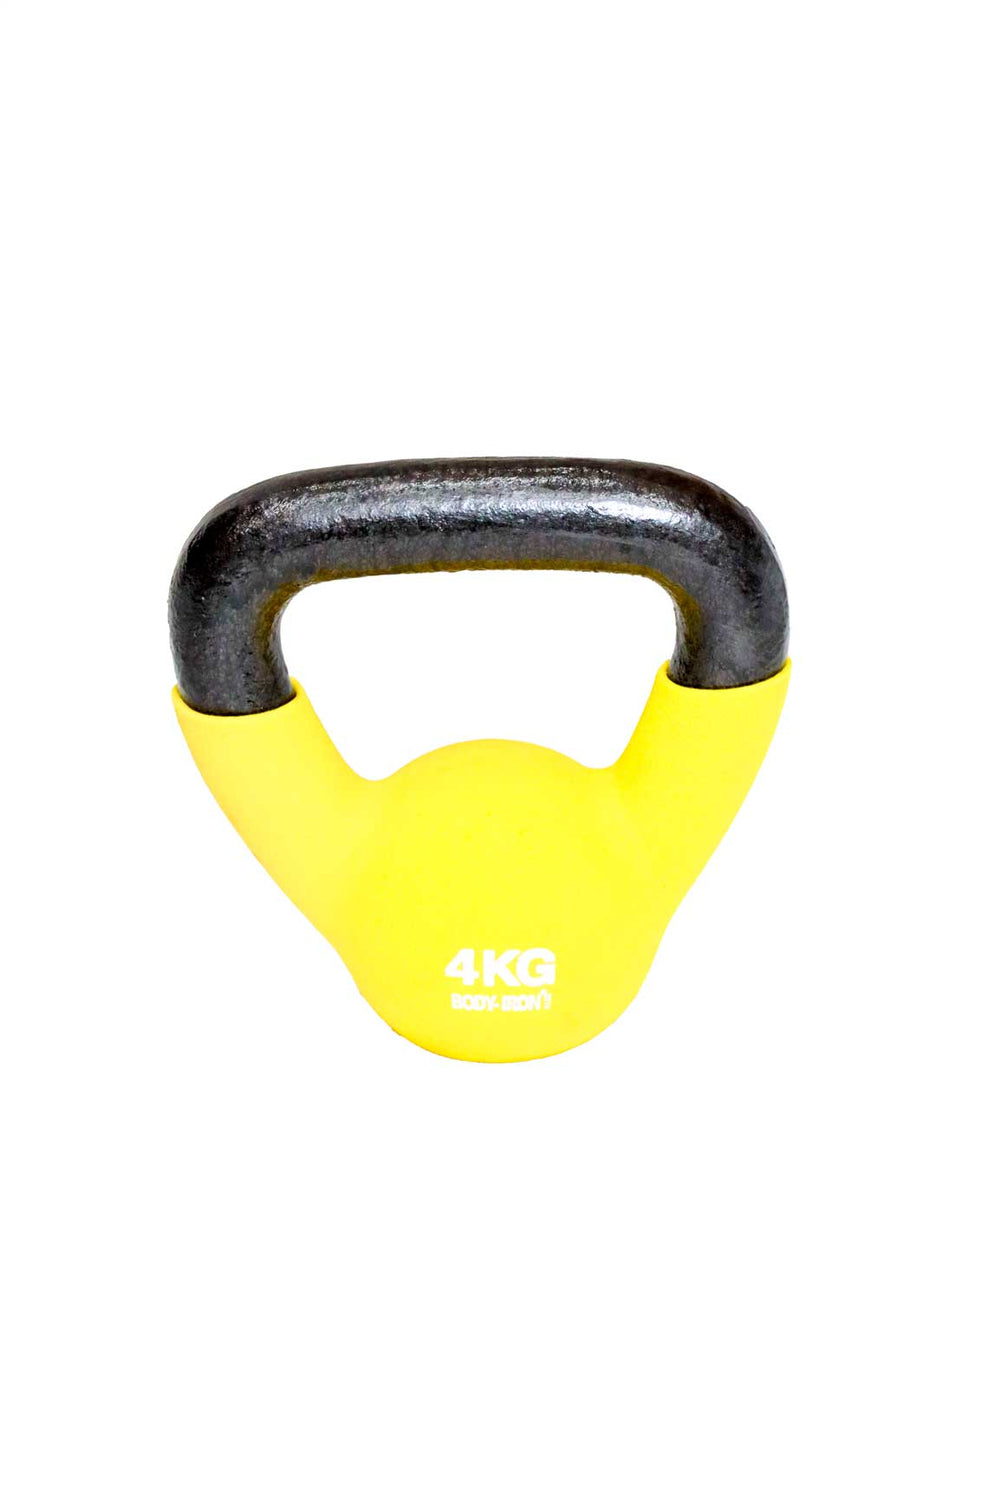 Yellow 4kg kettlebell with white writing